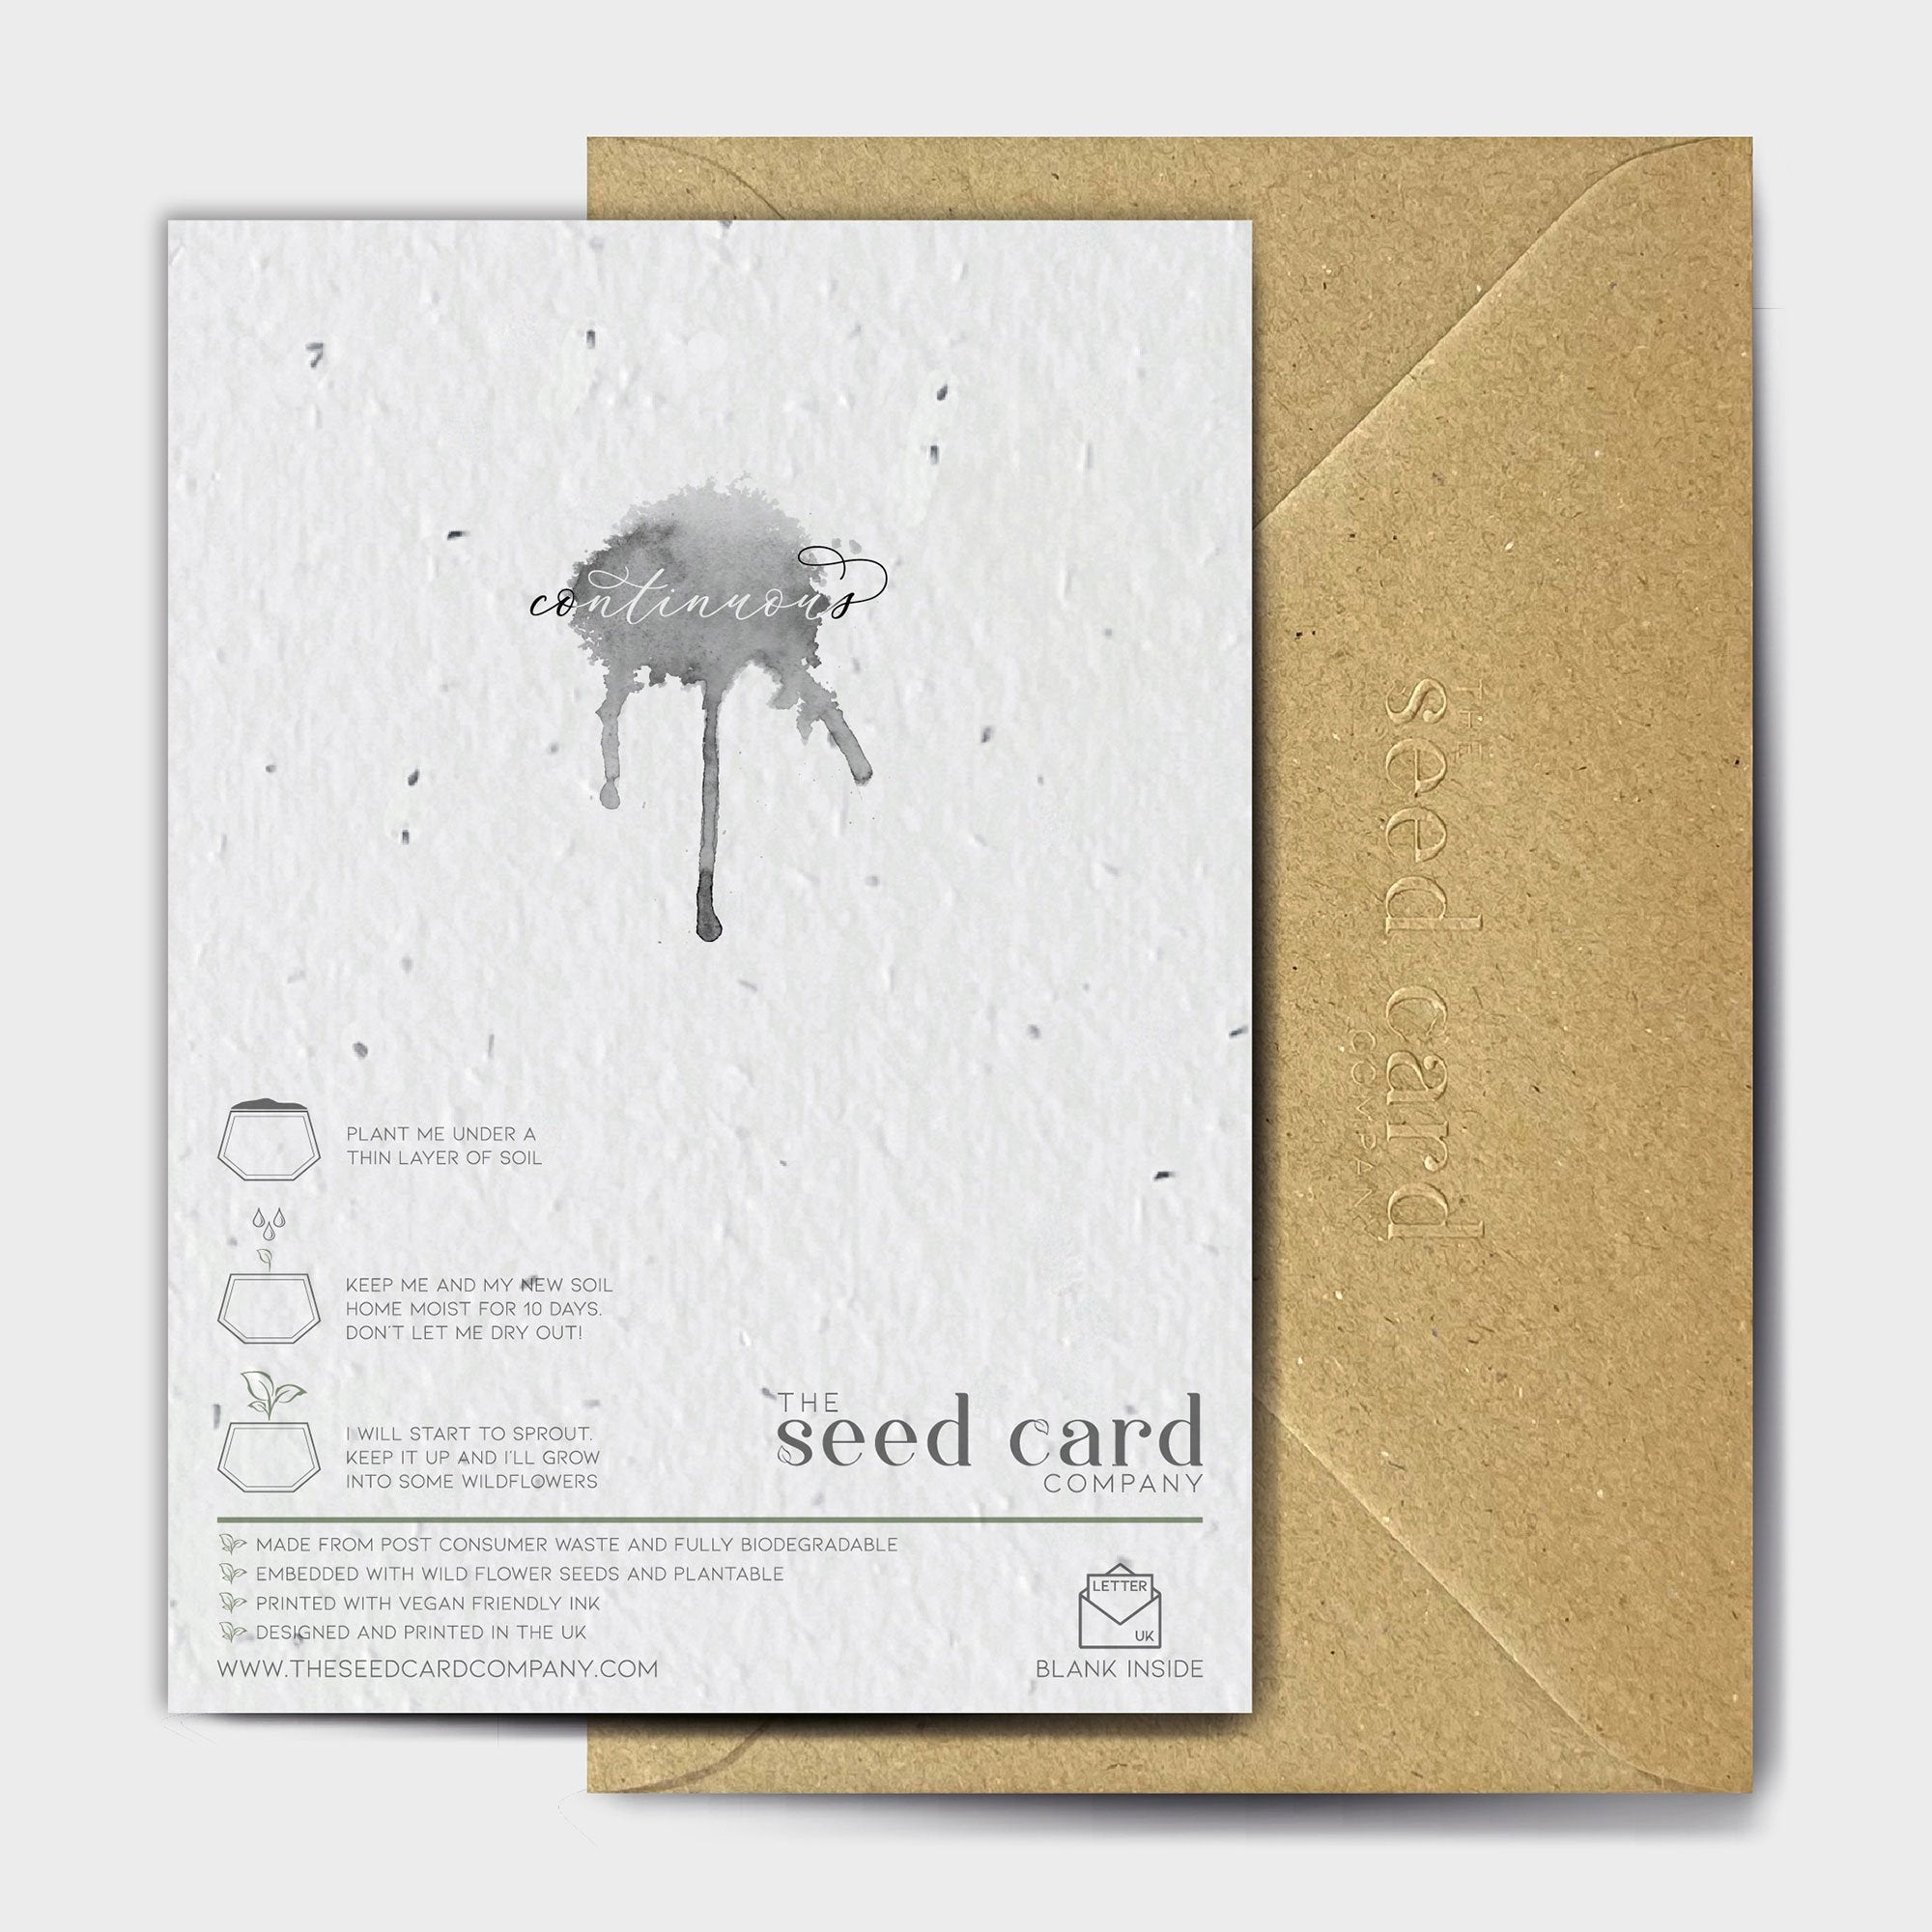 Shop online The Cherry On Top - 100% biodegradable seed-embedded cards Shop -The Seed Card Company